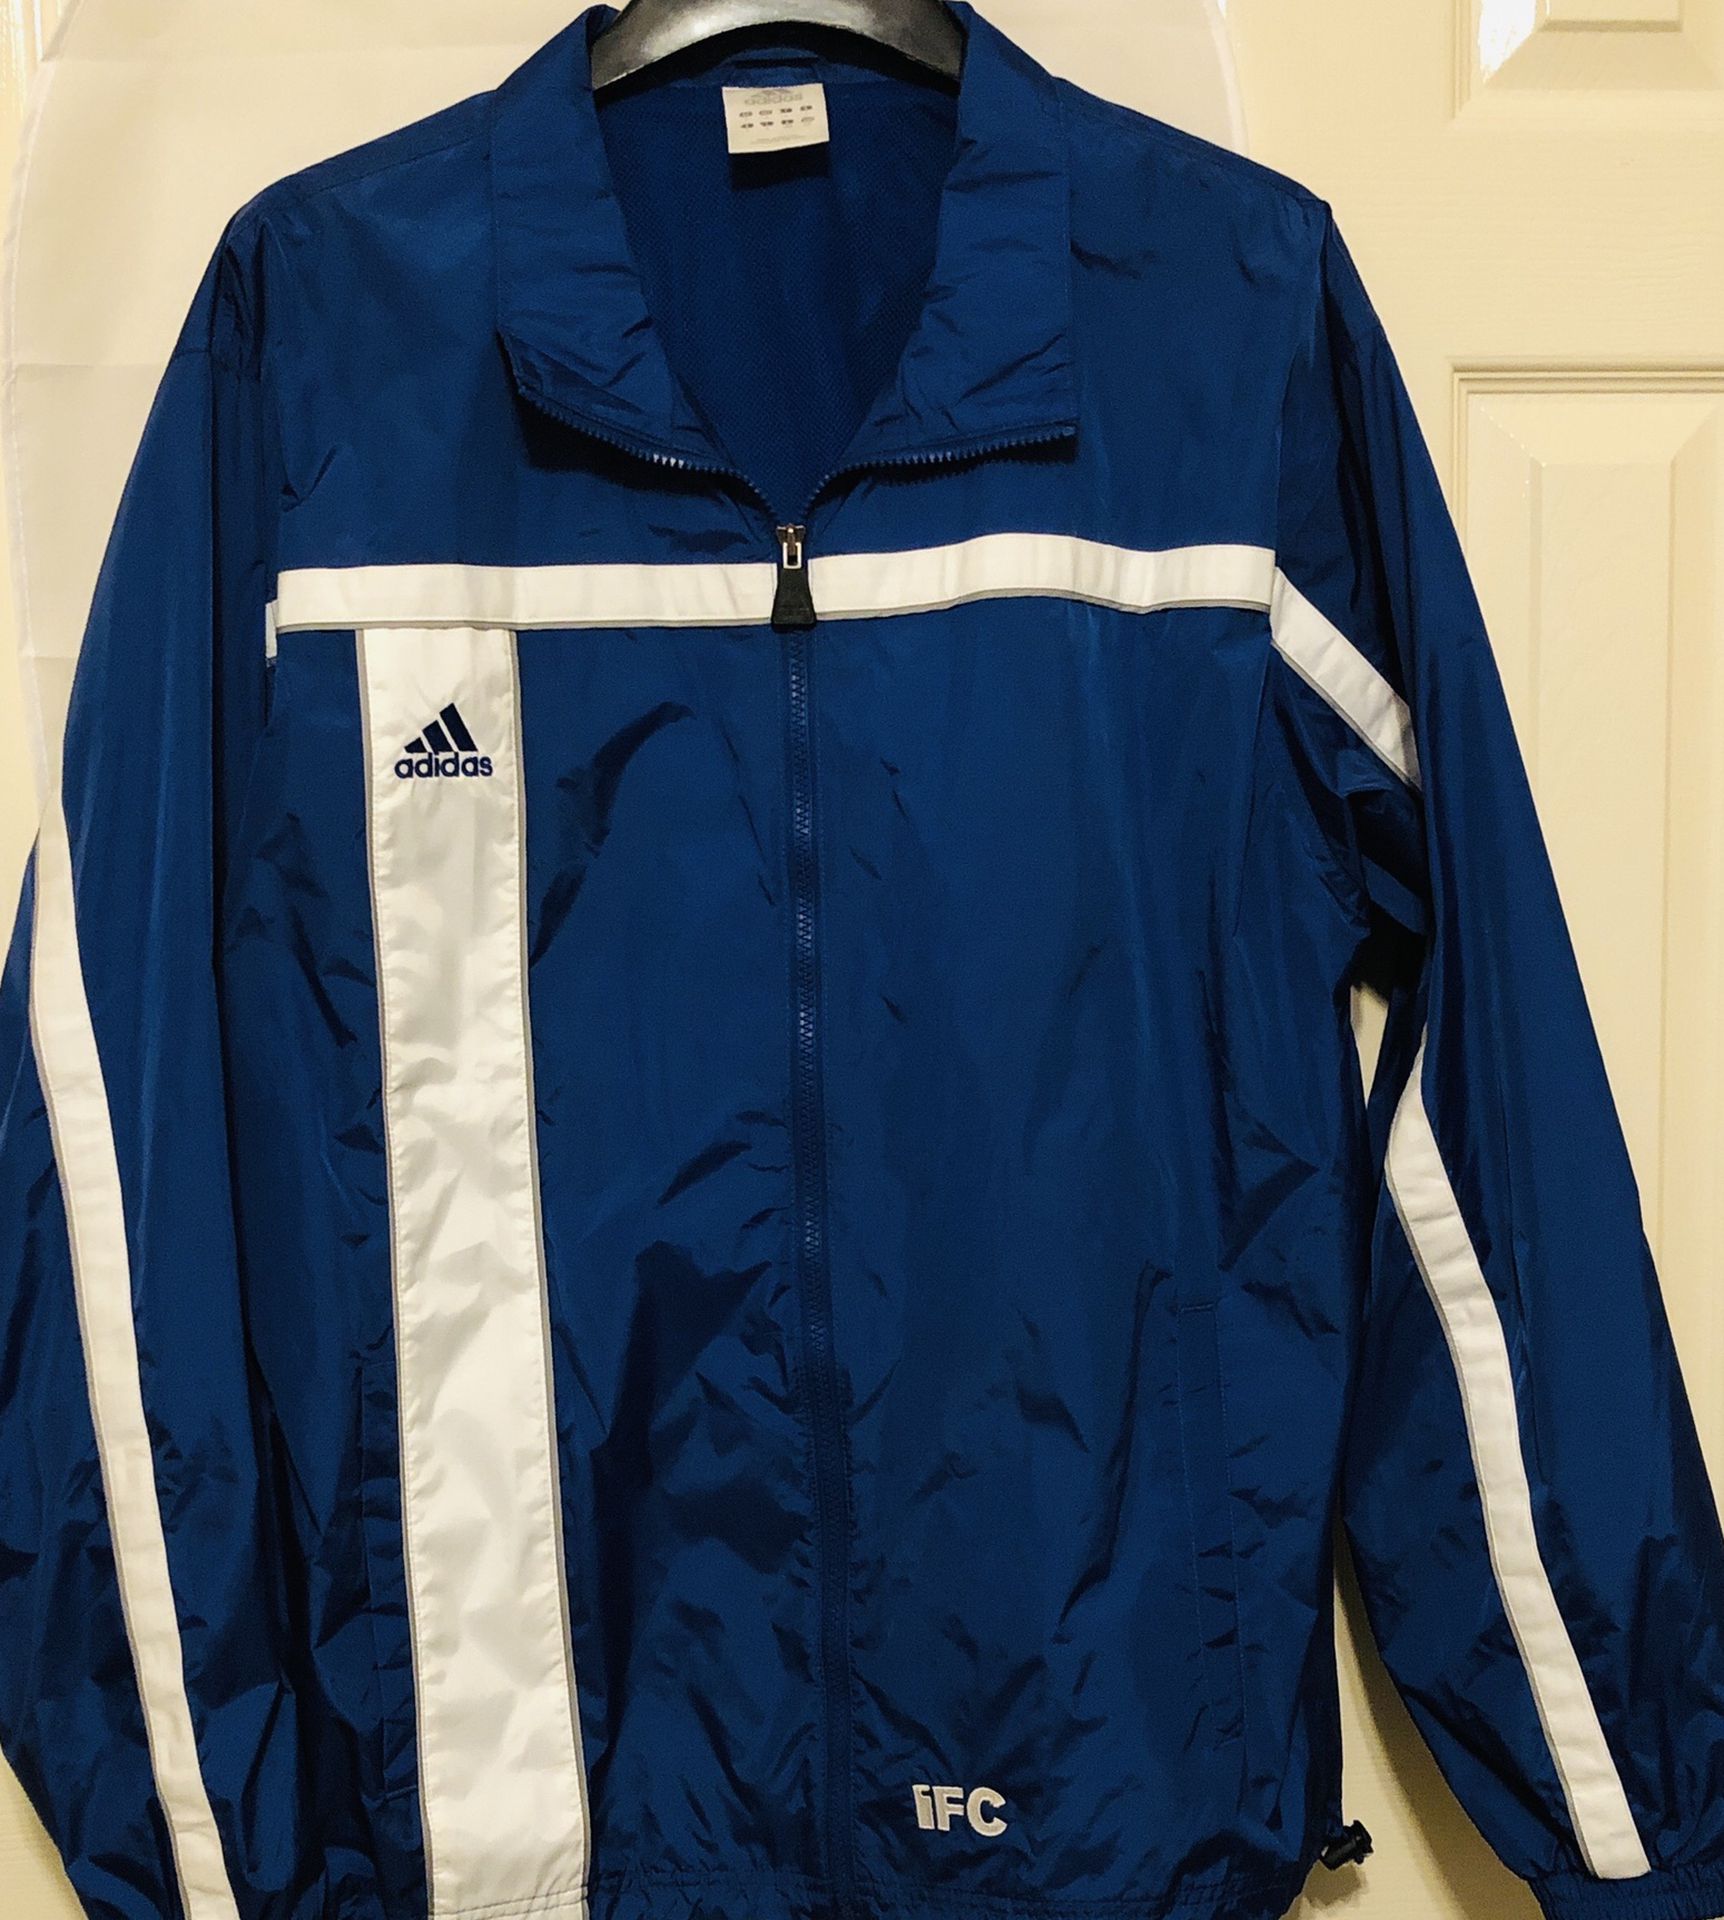 Adidas Jacket Special Edition Made for iFC Channel RN# 88387 CA# 40312 Blue with White Stripes Warm-Up Track Jacket Men's Large